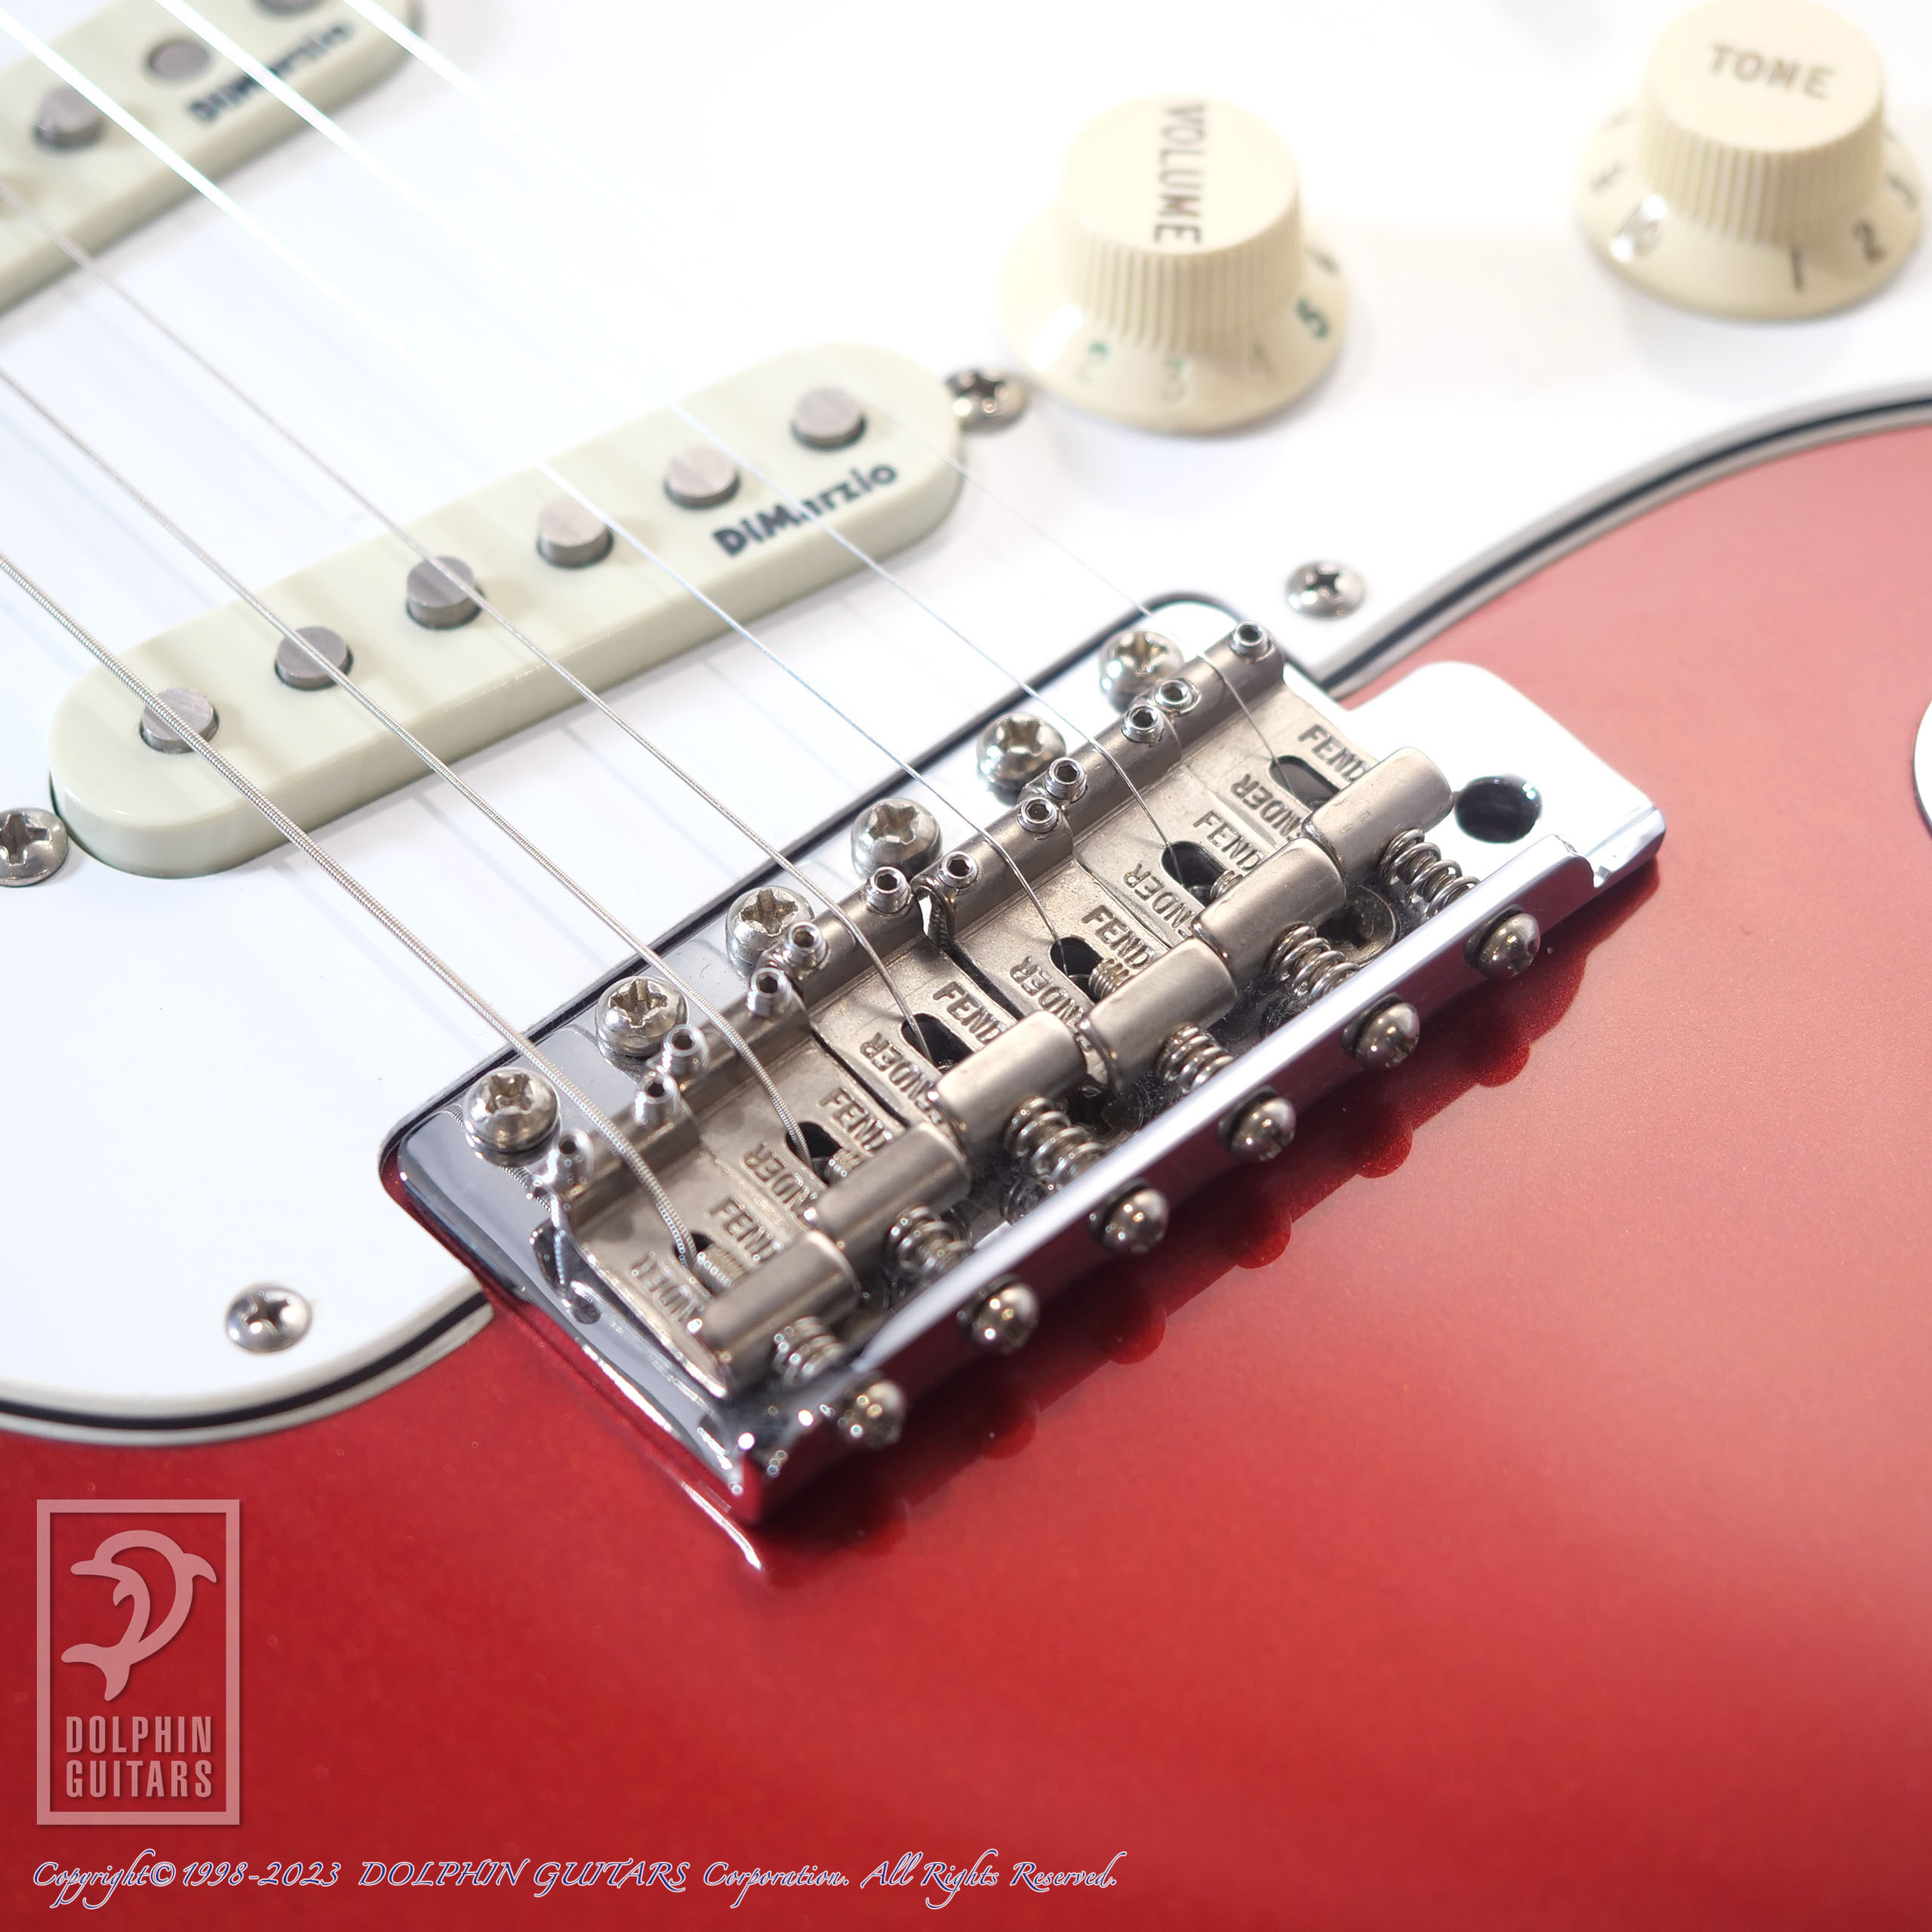 FENDER USA Yngwie Malmsteen Stratocaster (Candy Apple Red)|ドルフィンギターズ